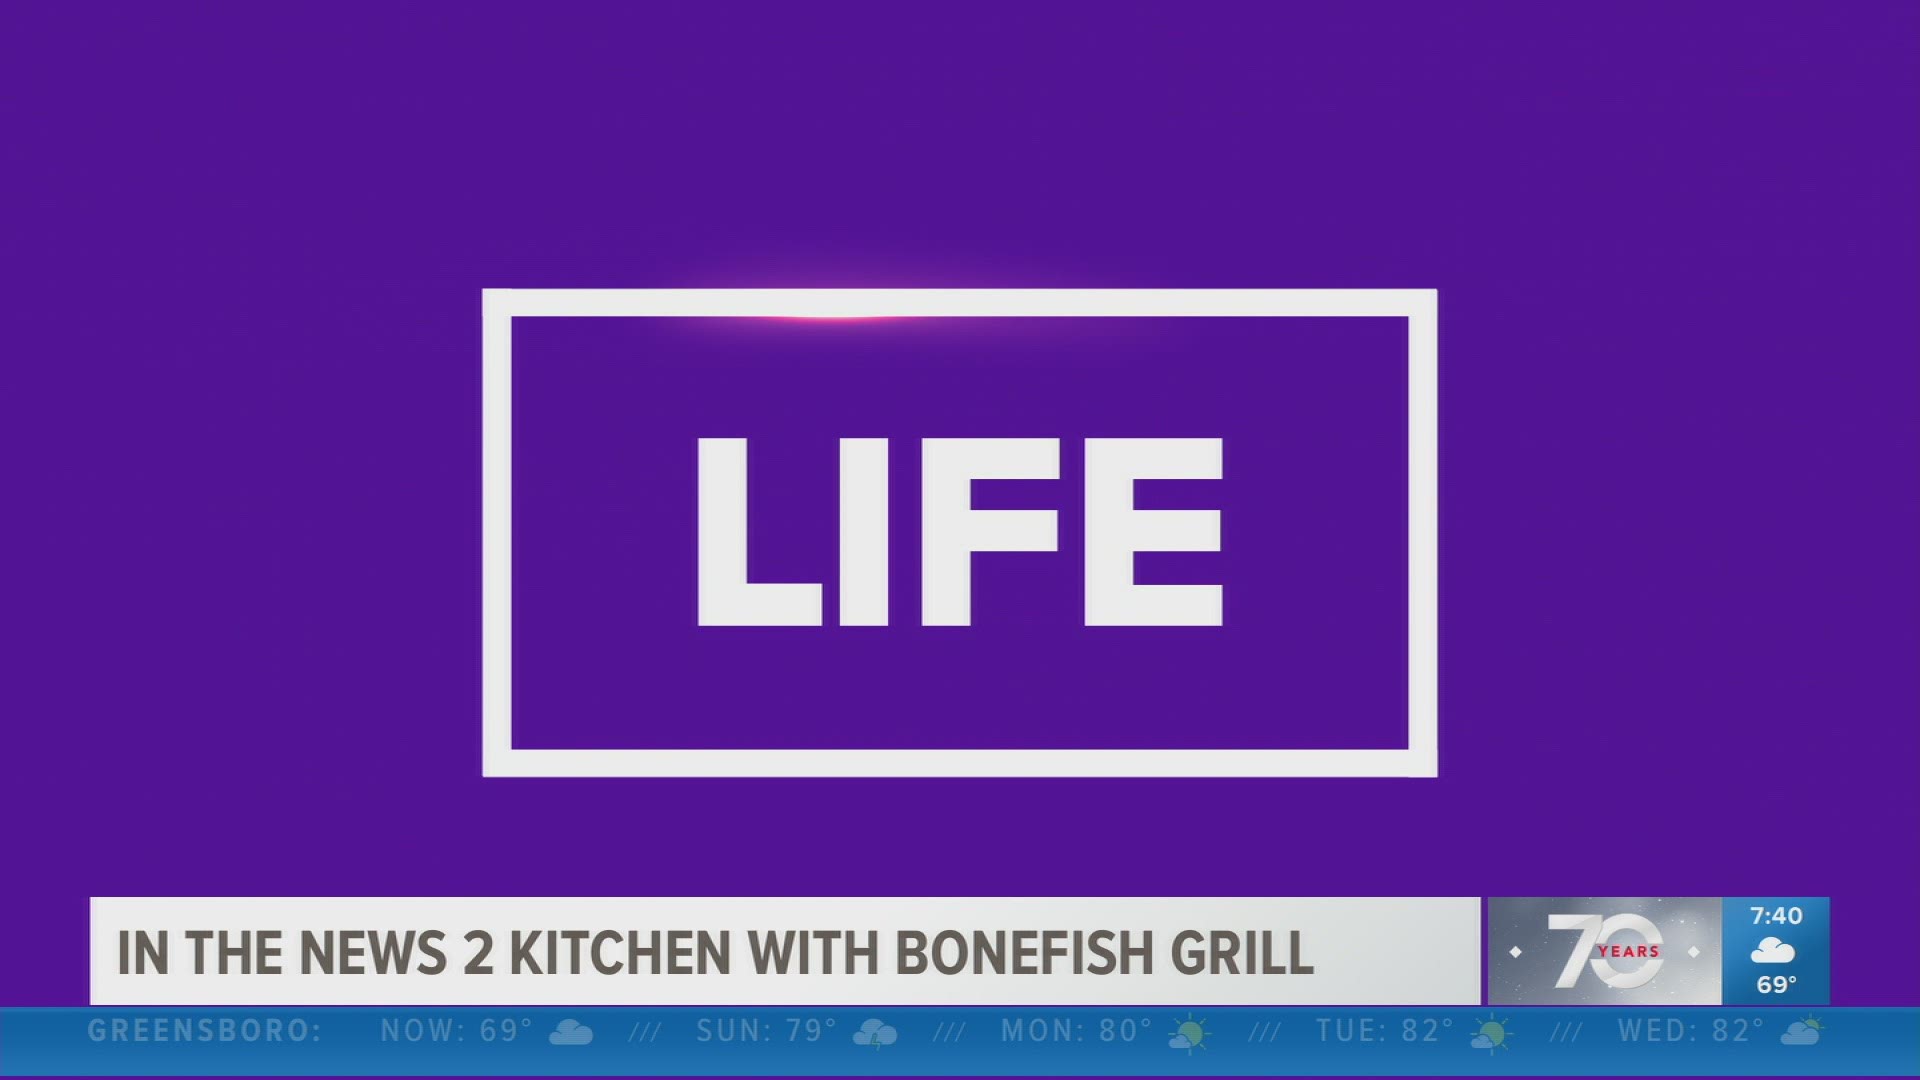 Jennifer Wright joins us in the WFMY News 2 kitchen. On the menu today: Creme Brulee French Toast, Cucumber Spa Spritz, and Saigon Shrimp and Scallops. Enjoy!